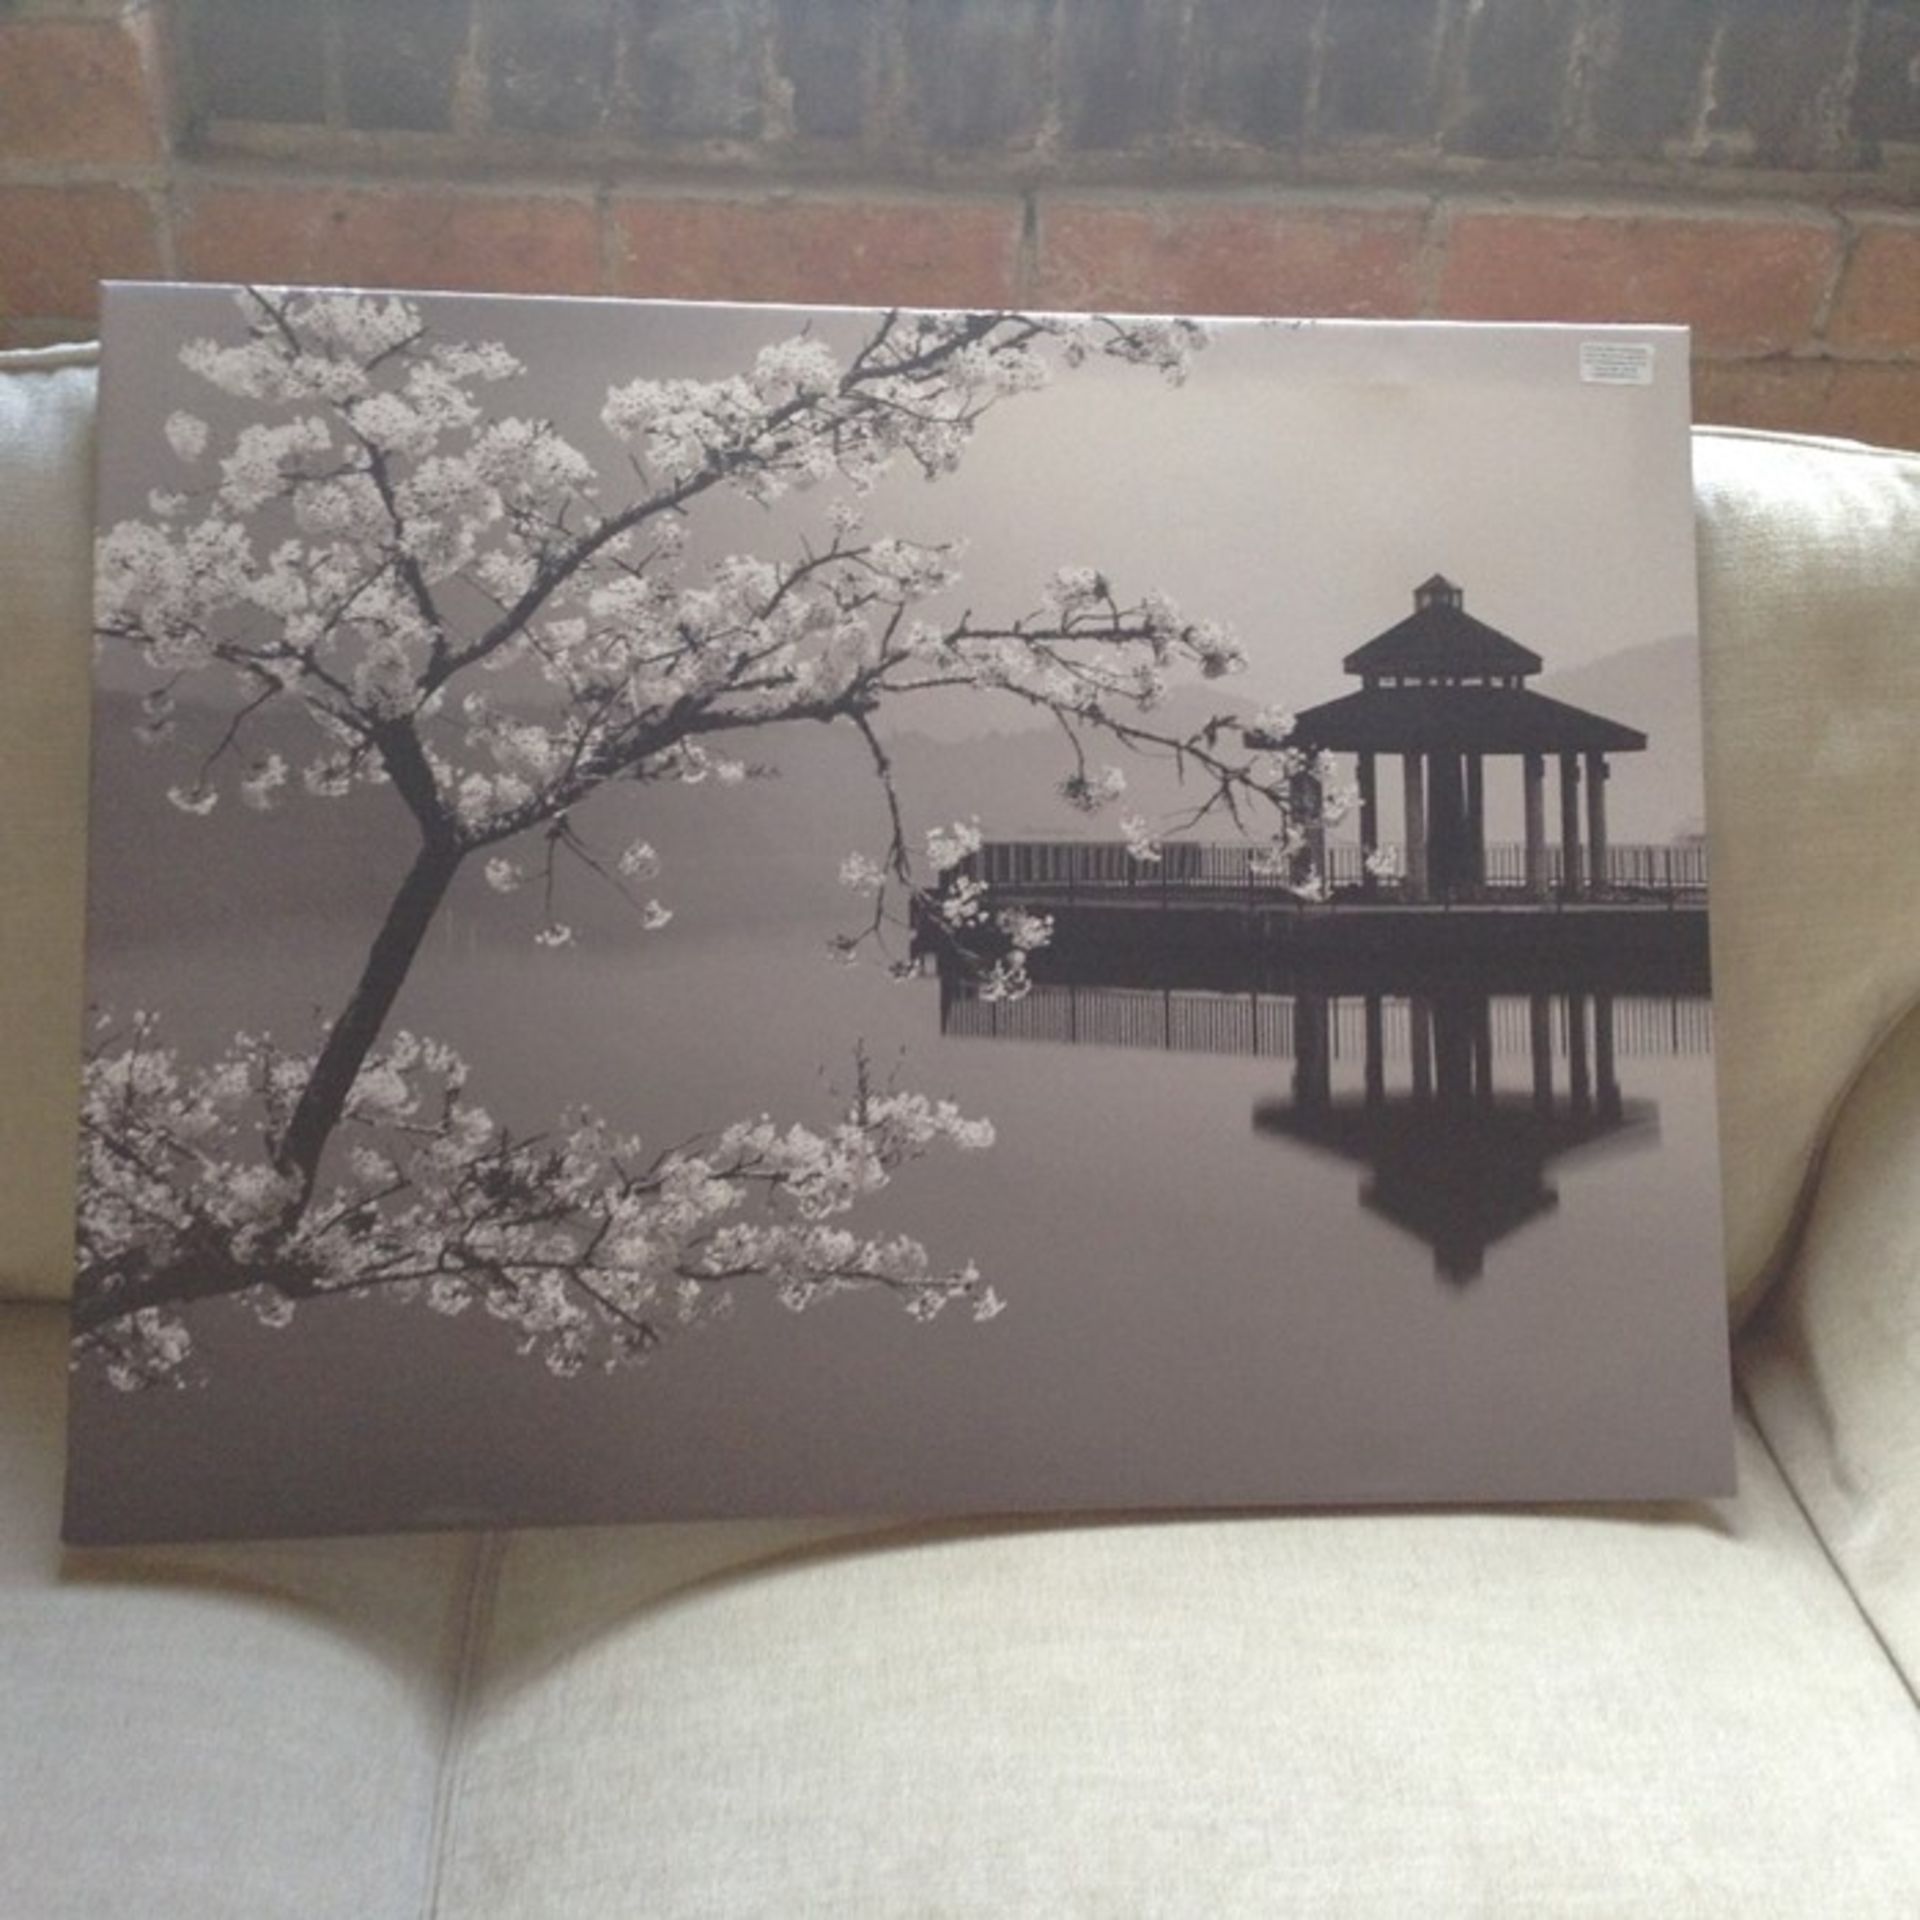 East Urban Home,Lovely Cherry Blossom by Japanese Lake A Photographic Print on Canvas RRP -£94.99(